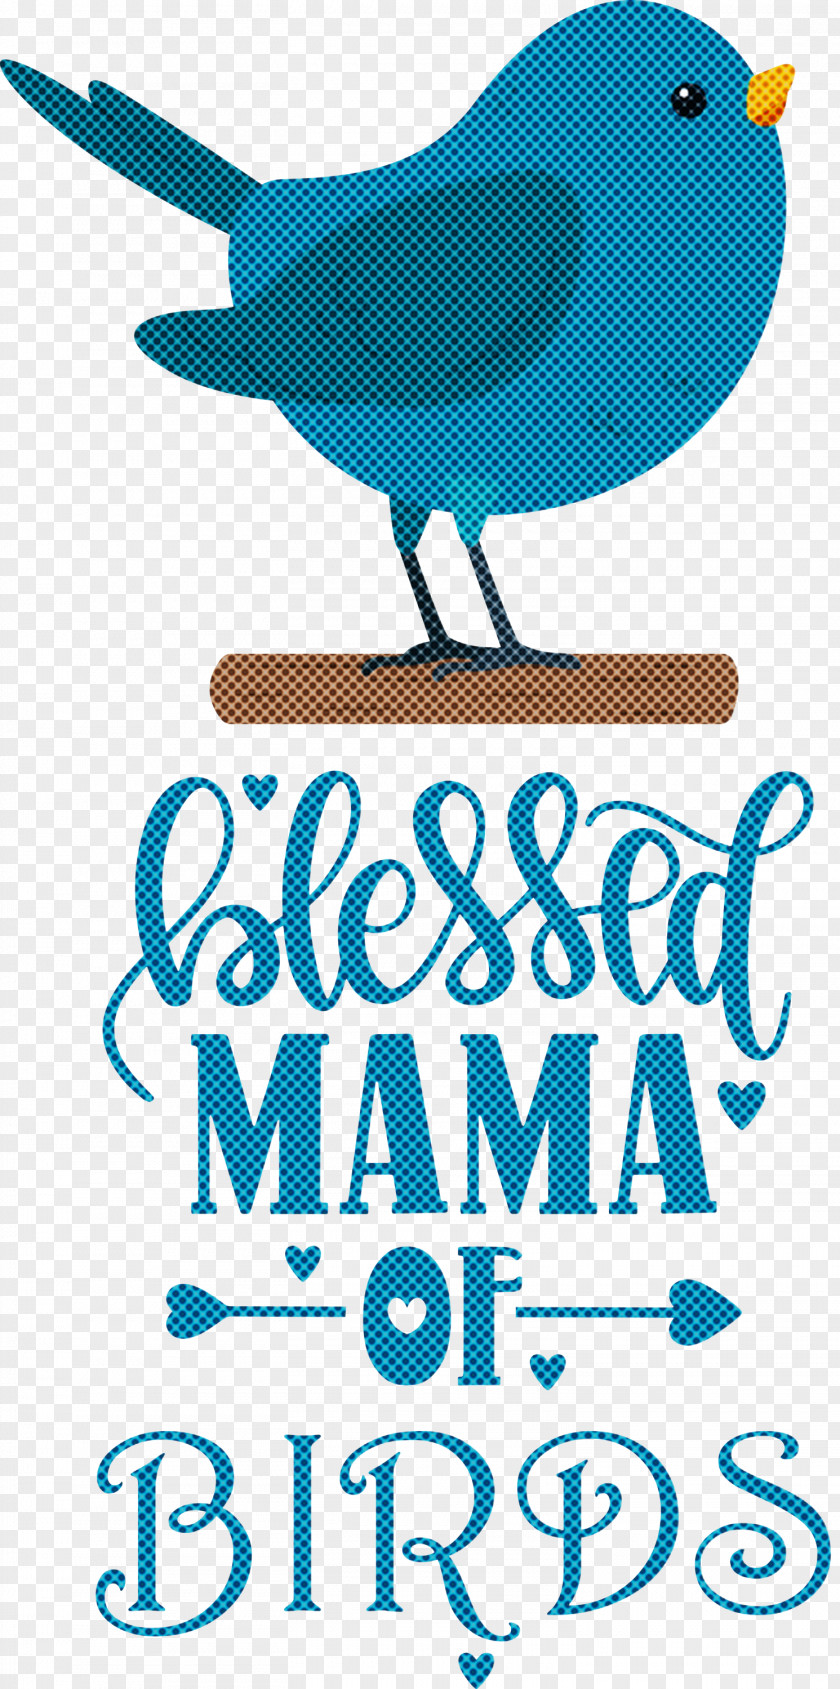 Bird Birds Blessed Mama Of PNG